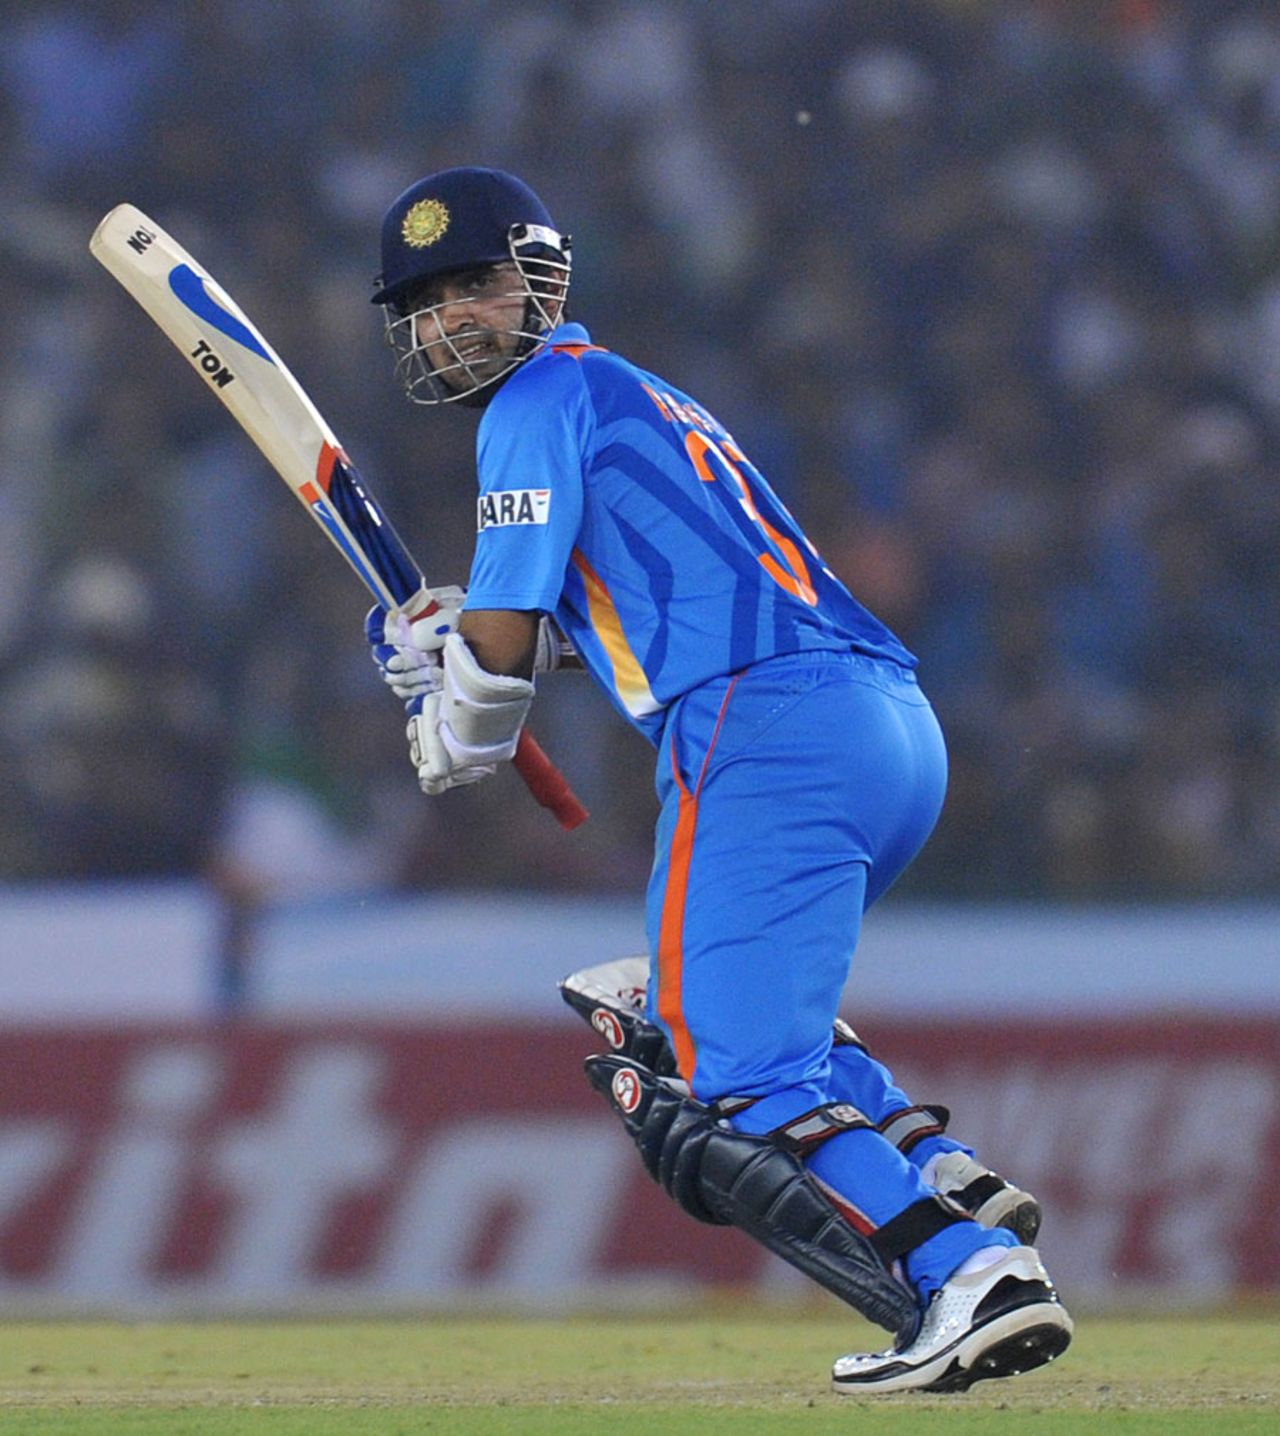 Ajinkya Rahane helped give India a solid start to their chase, India v England, 3rd ODI, Mohali, October 20, 2011